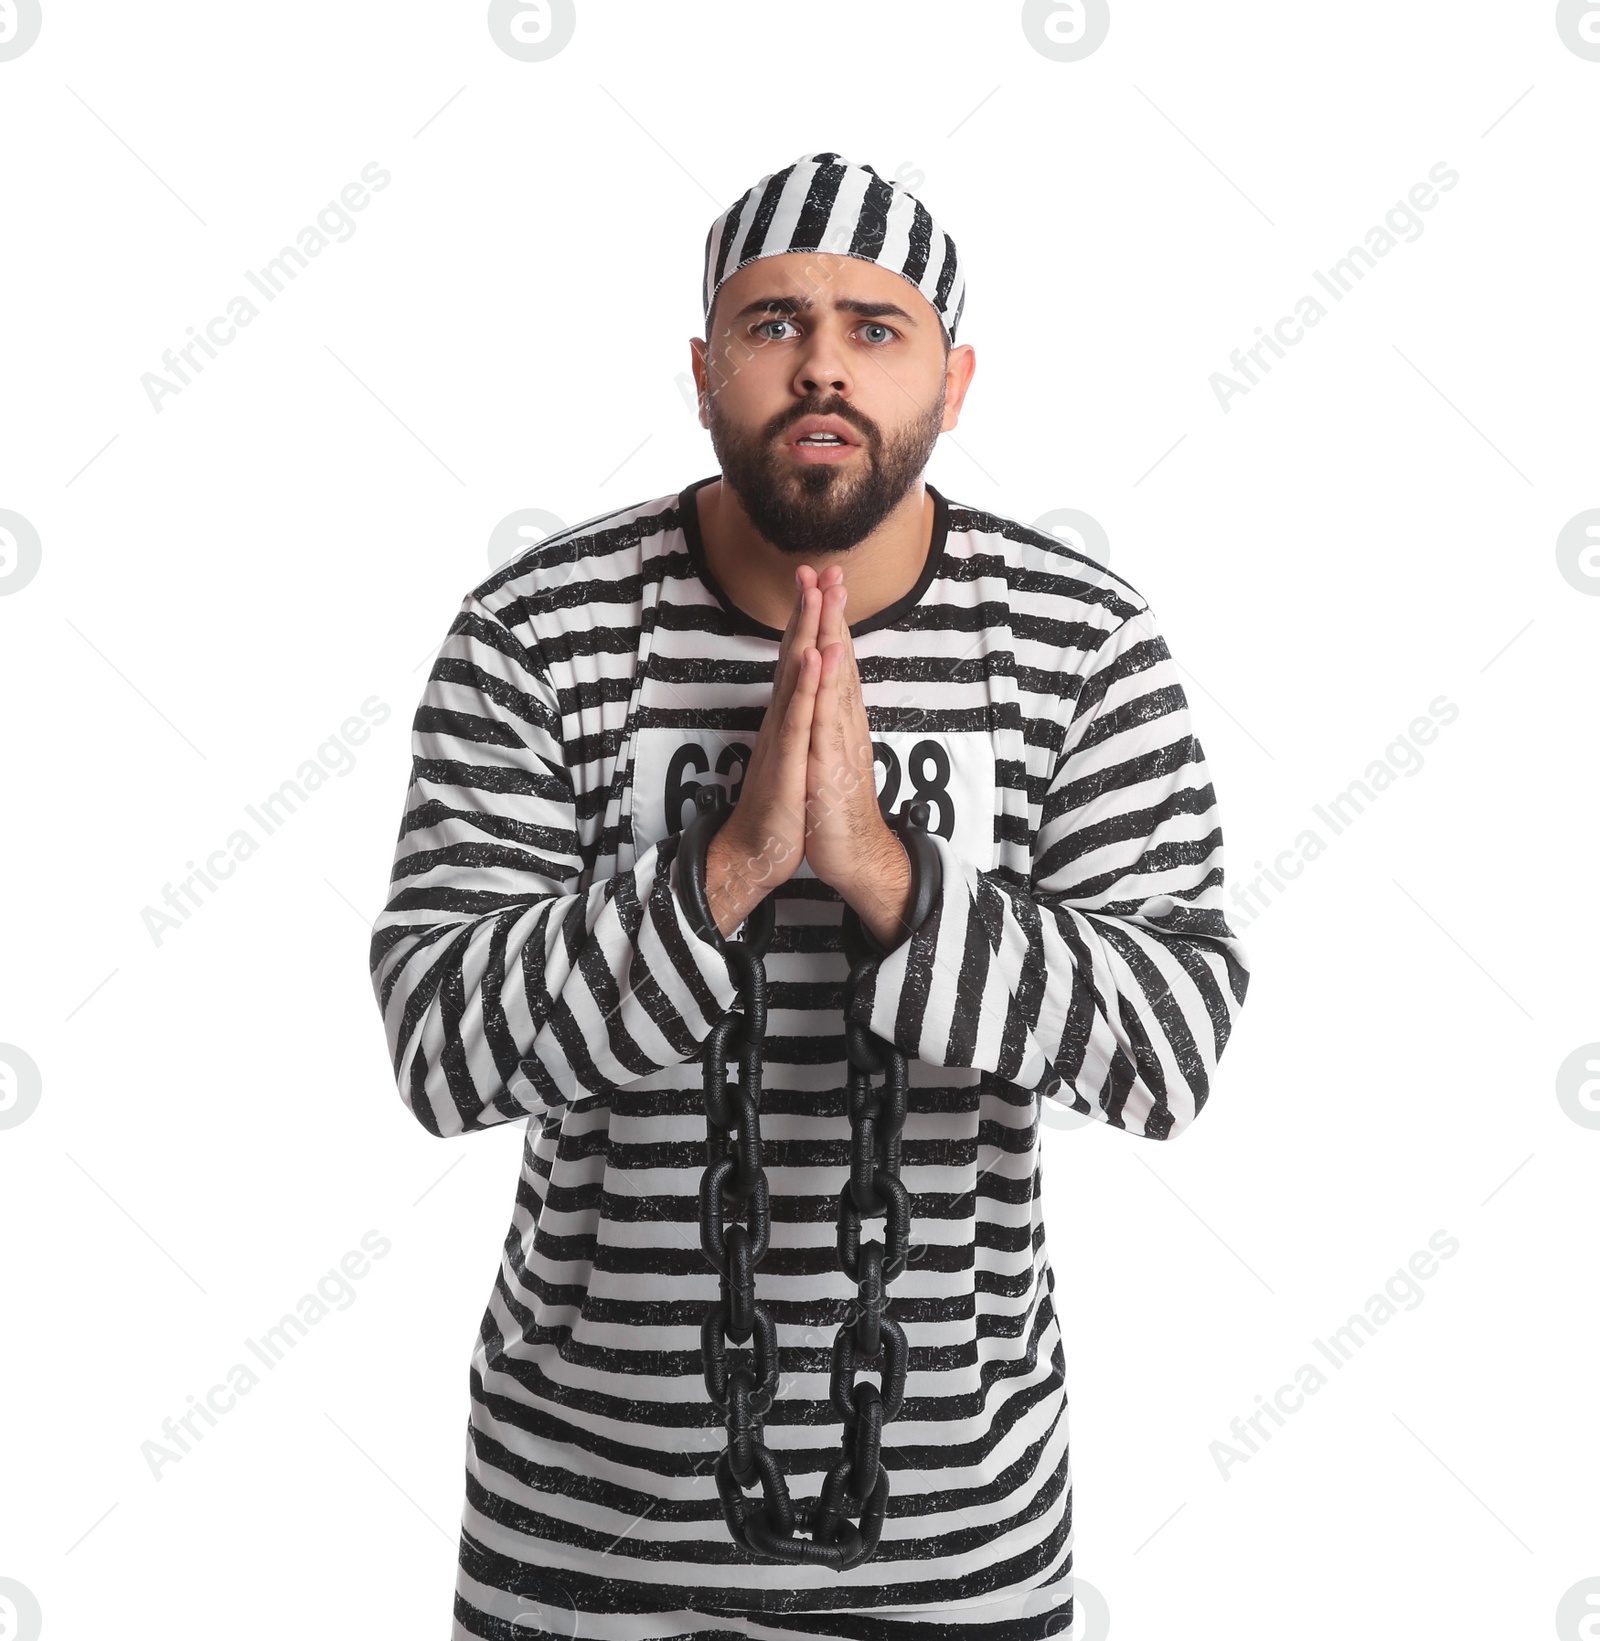 Photo of Prisoner in special uniform with chained hands praying on white background